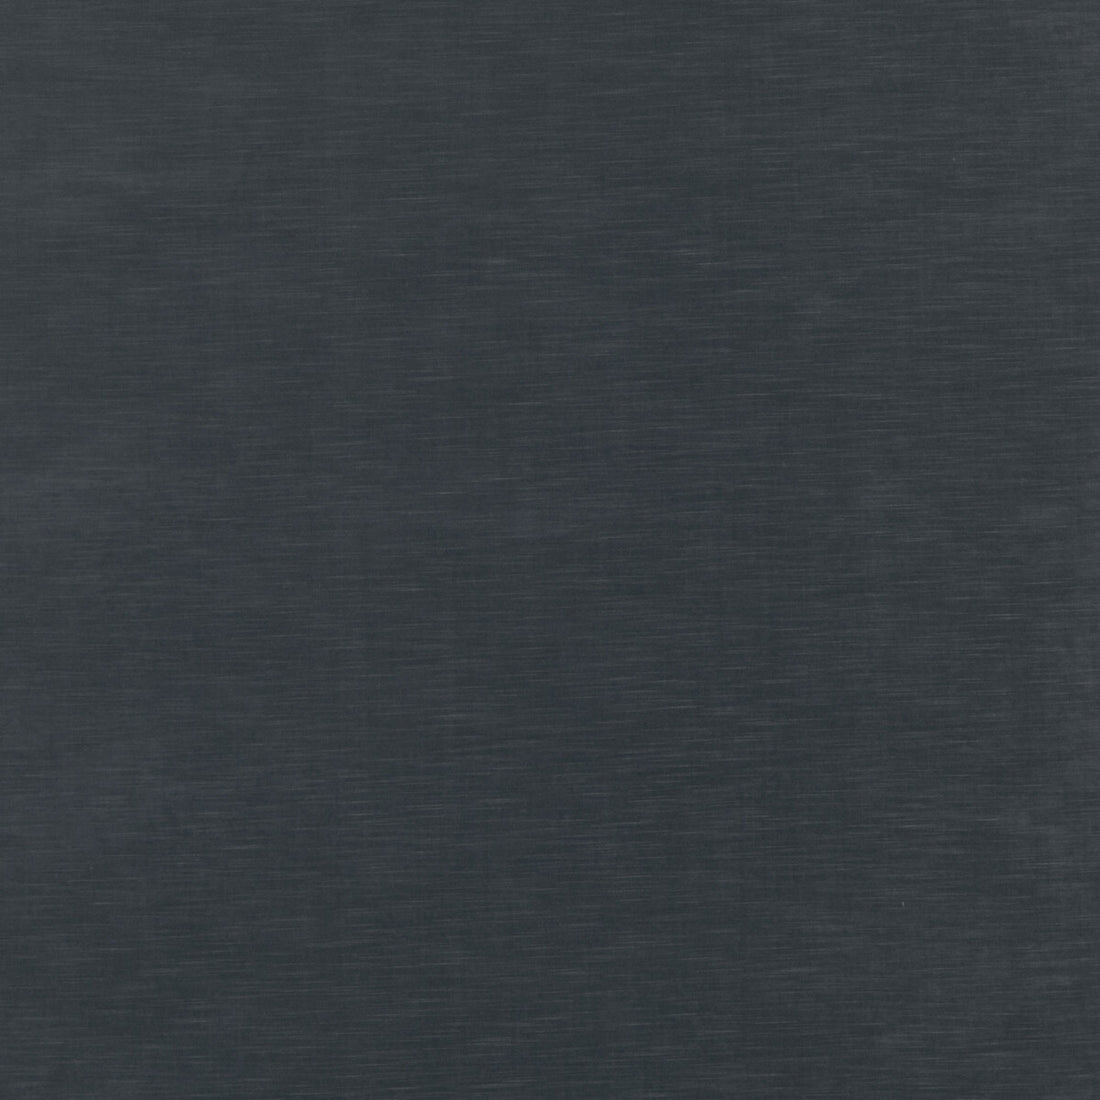 Quintessential Velvet fabric in graphite color - pattern ED85359.970.0 - by Threads in the Quintessential Velvet collection